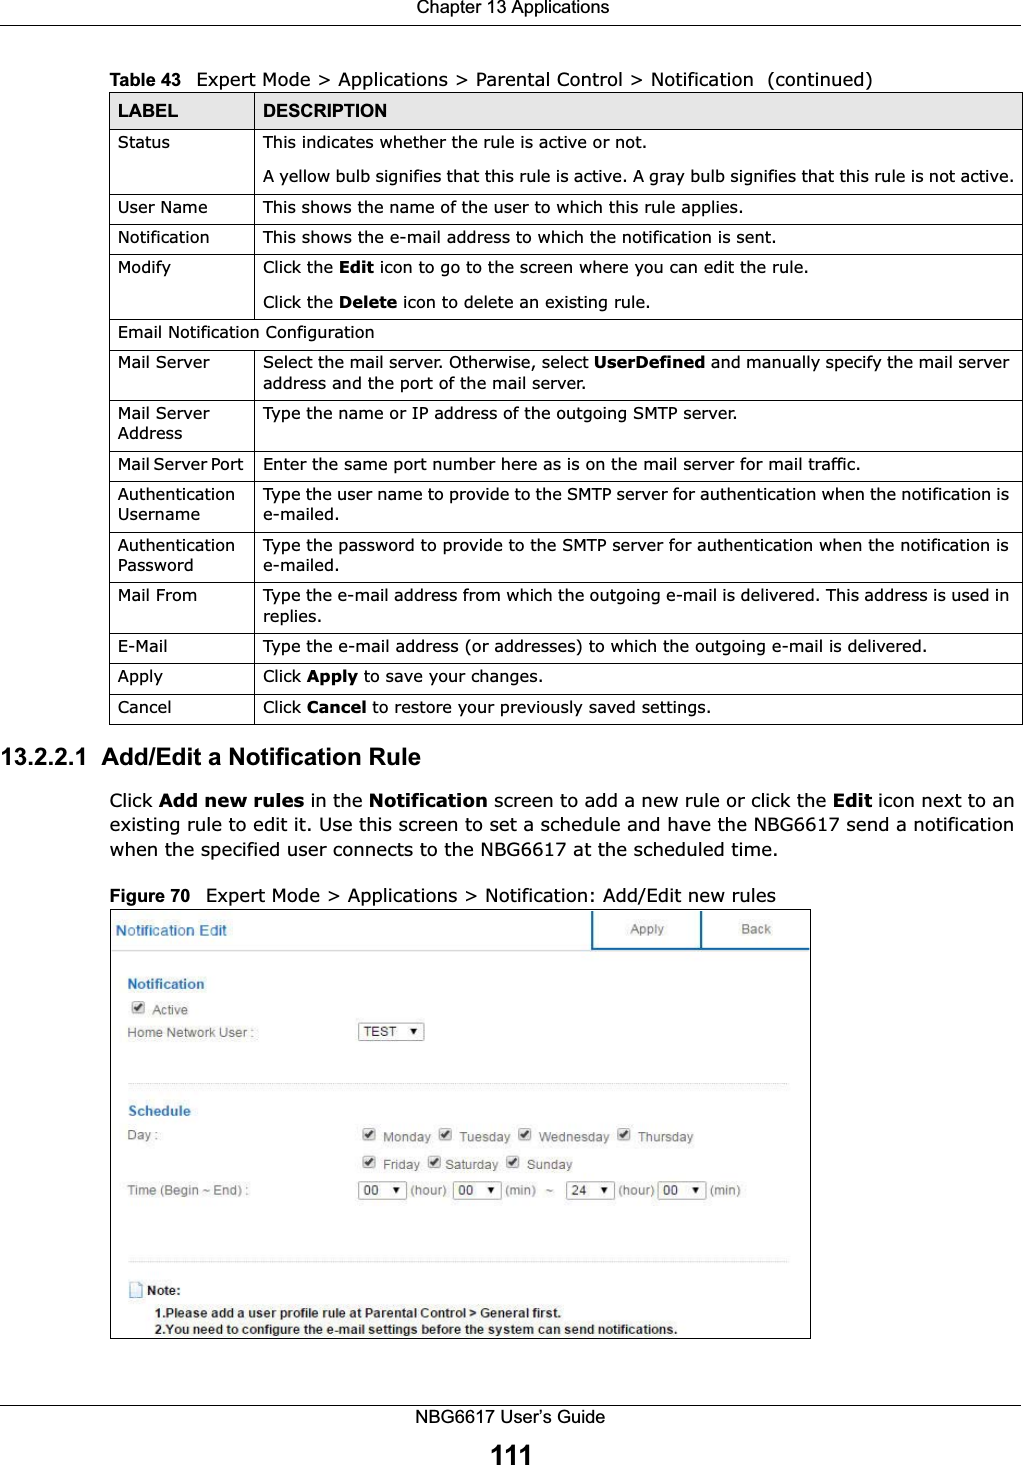  Chapter 13 ApplicationsNBG6617 User’s Guide11113.2.2.1  Add/Edit a Notification RuleClick Add new rules in the Notification screen to add a new rule or click the Edit icon next to an existing rule to edit it. Use this screen to set a schedule and have the NBG6617 send a notification when the specified user connects to the NBG6617 at the scheduled time.Figure 70   Expert Mode &gt; Applications &gt; Notification: Add/Edit new rules Status This indicates whether the rule is active or not.A yellow bulb signifies that this rule is active. A gray bulb signifies that this rule is not active.User Name This shows the name of the user to which this rule applies.Notification This shows the e-mail address to which the notification is sent.Modify Click the Edit icon to go to the screen where you can edit the rule.Click the Delete icon to delete an existing rule.Email Notification ConfigurationMail Server Select the mail server. Otherwise, select UserDefined and manually specify the mail server address and the port of the mail server.Mail Server AddressType the name or IP address of the outgoing SMTP server.Mail Server Port  Enter the same port number here as is on the mail server for mail traffic.Authentication UsernameType the user name to provide to the SMTP server for authentication when the notification is e-mailed.Authentication PasswordType the password to provide to the SMTP server for authentication when the notification is e-mailed.Mail From Type the e-mail address from which the outgoing e-mail is delivered. This address is used in replies.E-Mail Type the e-mail address (or addresses) to which the outgoing e-mail is delivered.Apply Click Apply to save your changes.Cancel Click Cancel to restore your previously saved settings.Table 43   Expert Mode &gt; Applications &gt; Parental Control &gt; Notification  (continued)LABEL DESCRIPTION